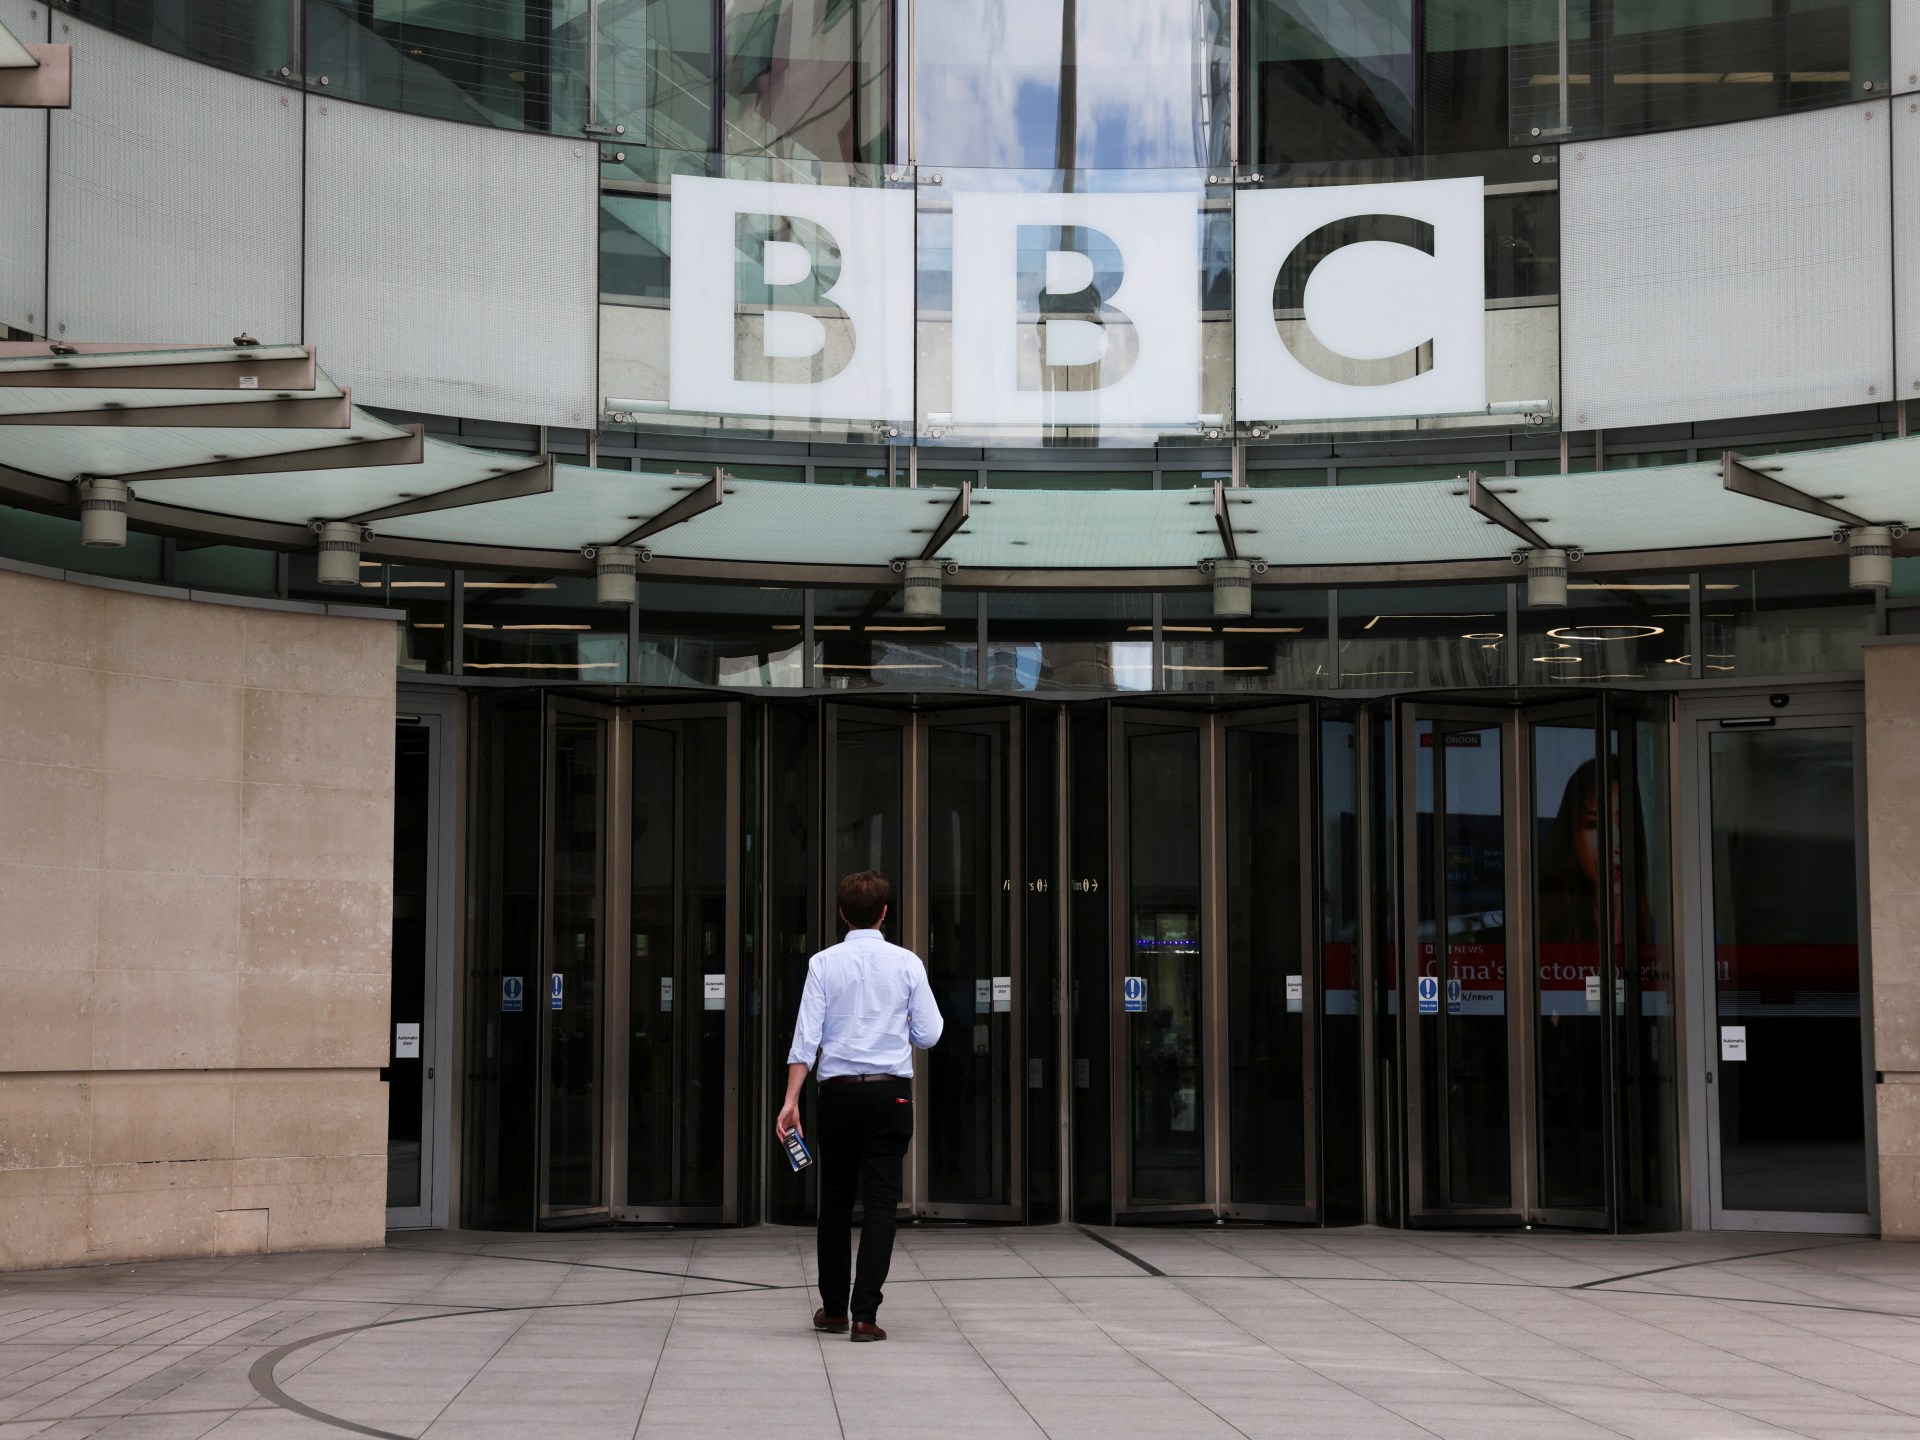 As Israel pounds Gaza, BBC journalists accuse broadcaster of bias | Israel-Palestine conflict News